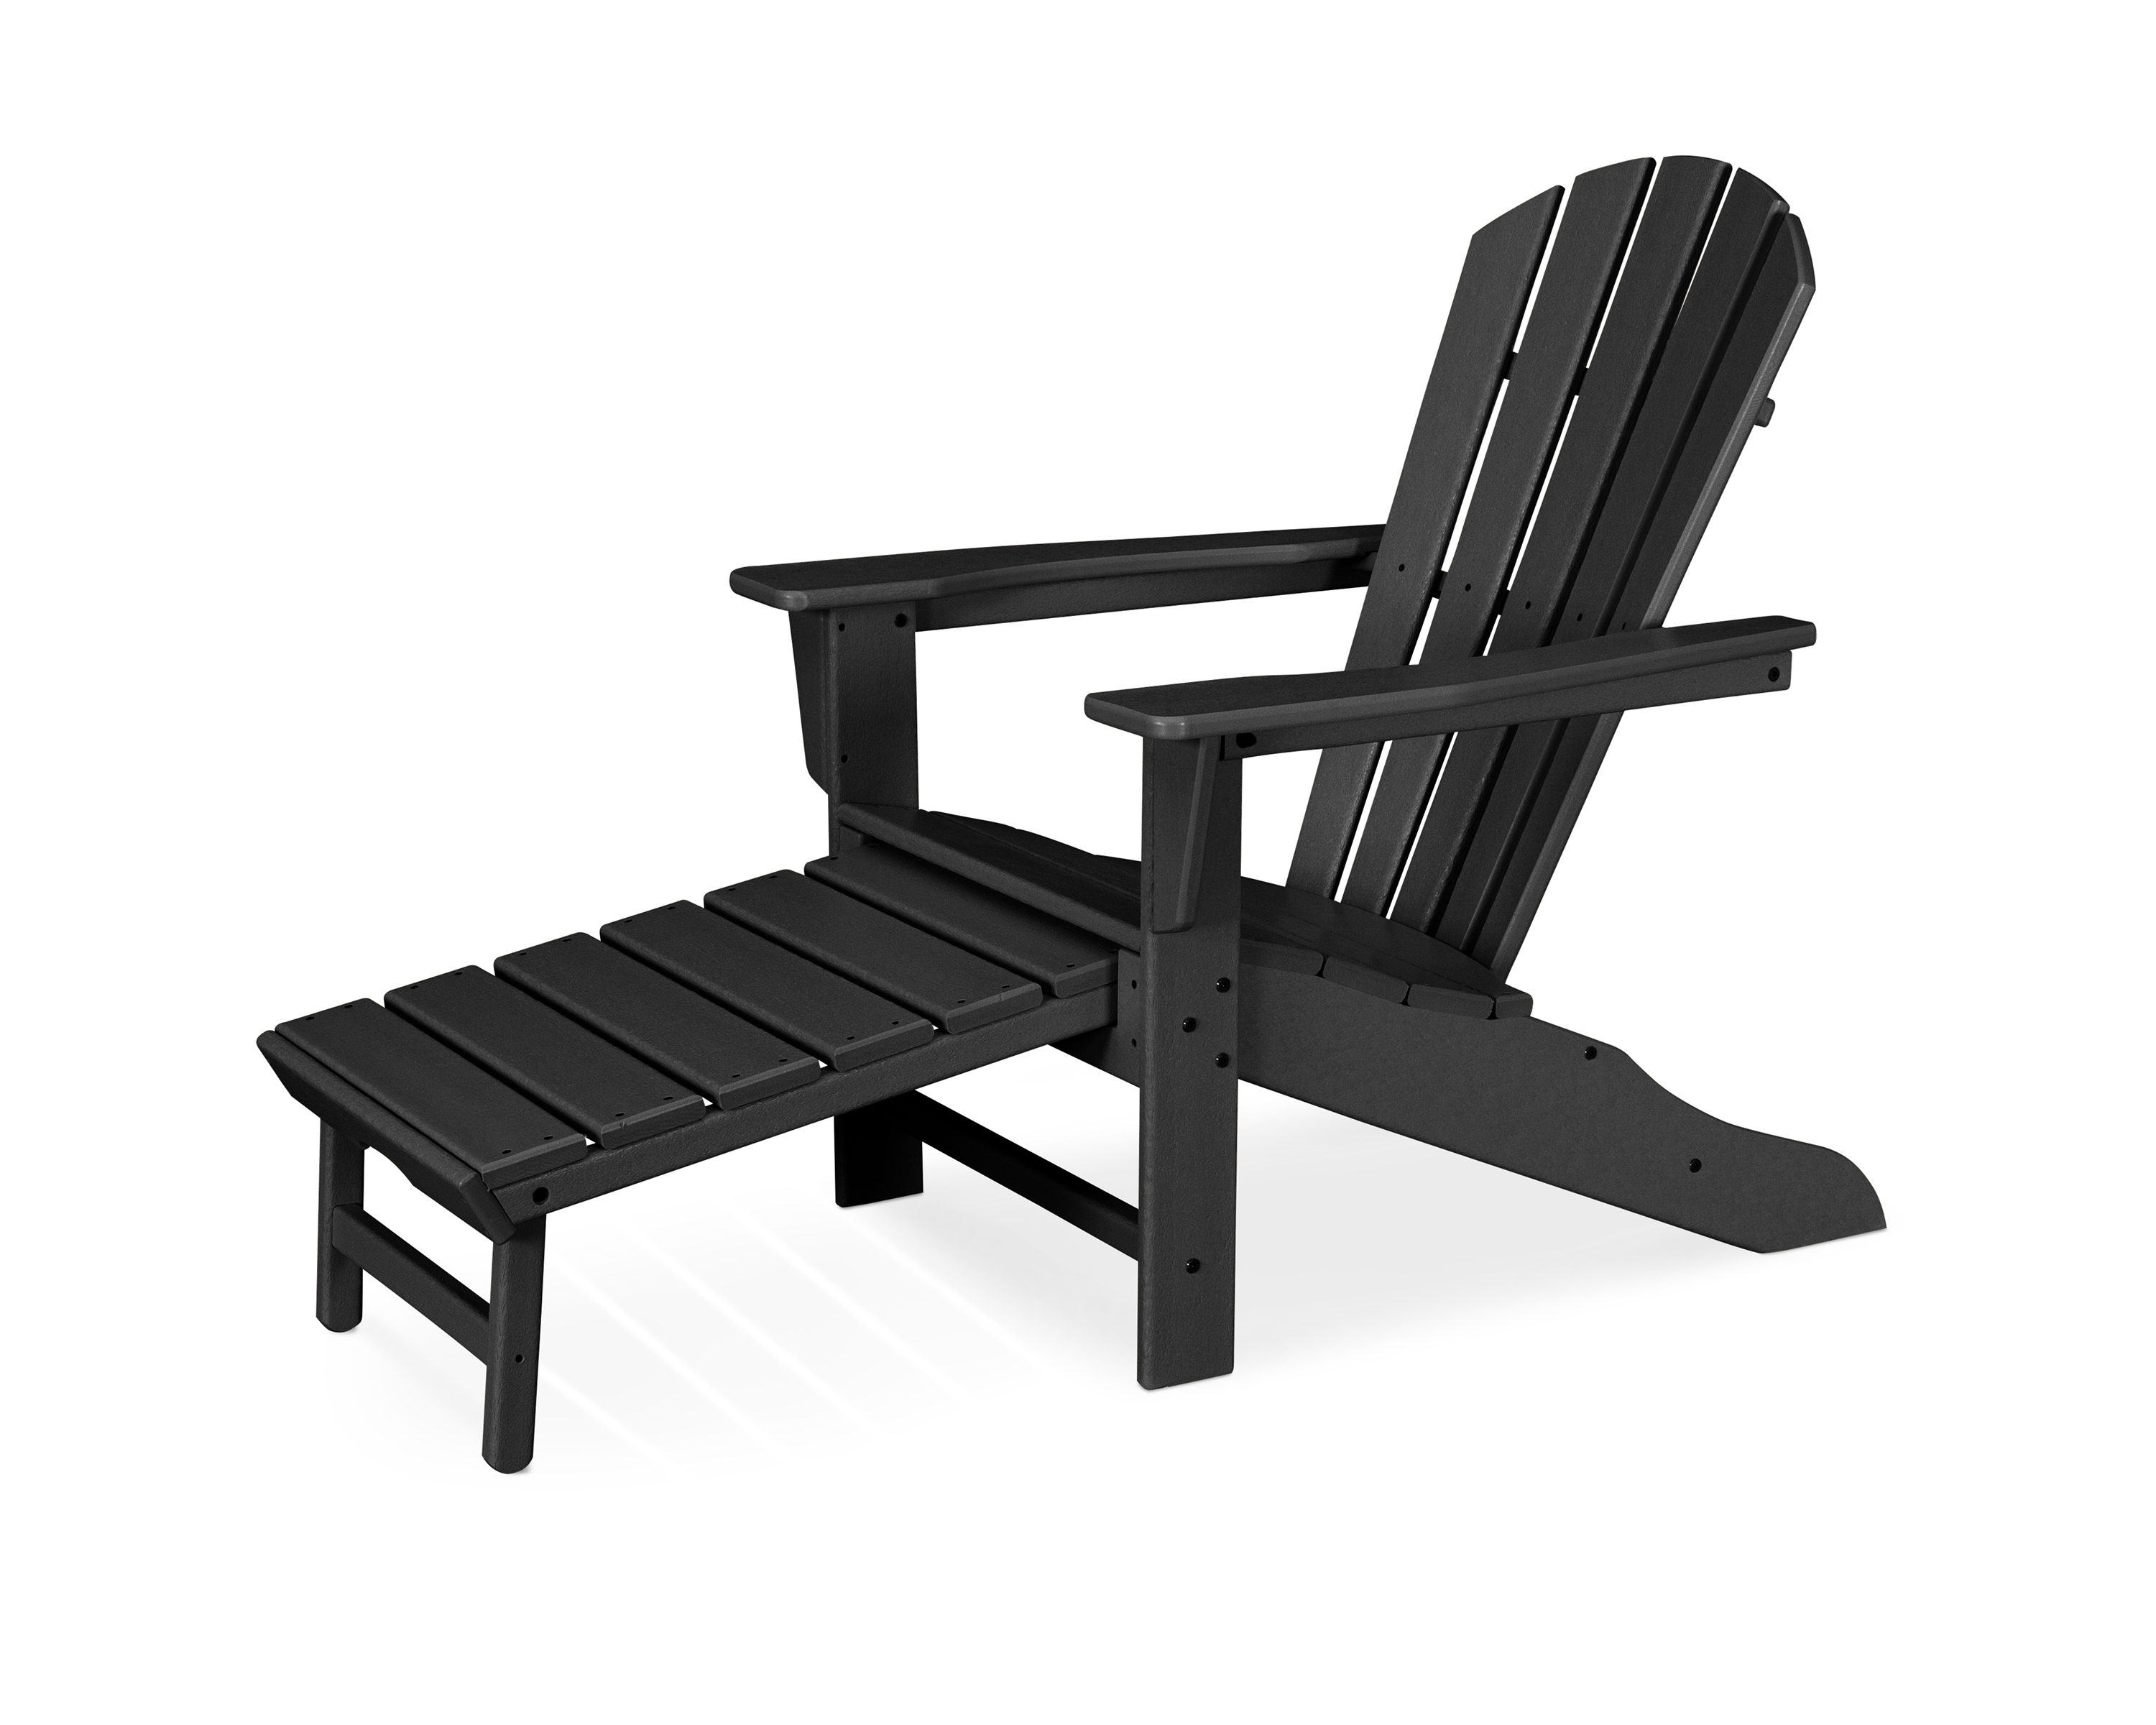 palm coast ultimate adirondack with hideaway ottoman in black thumbnail image